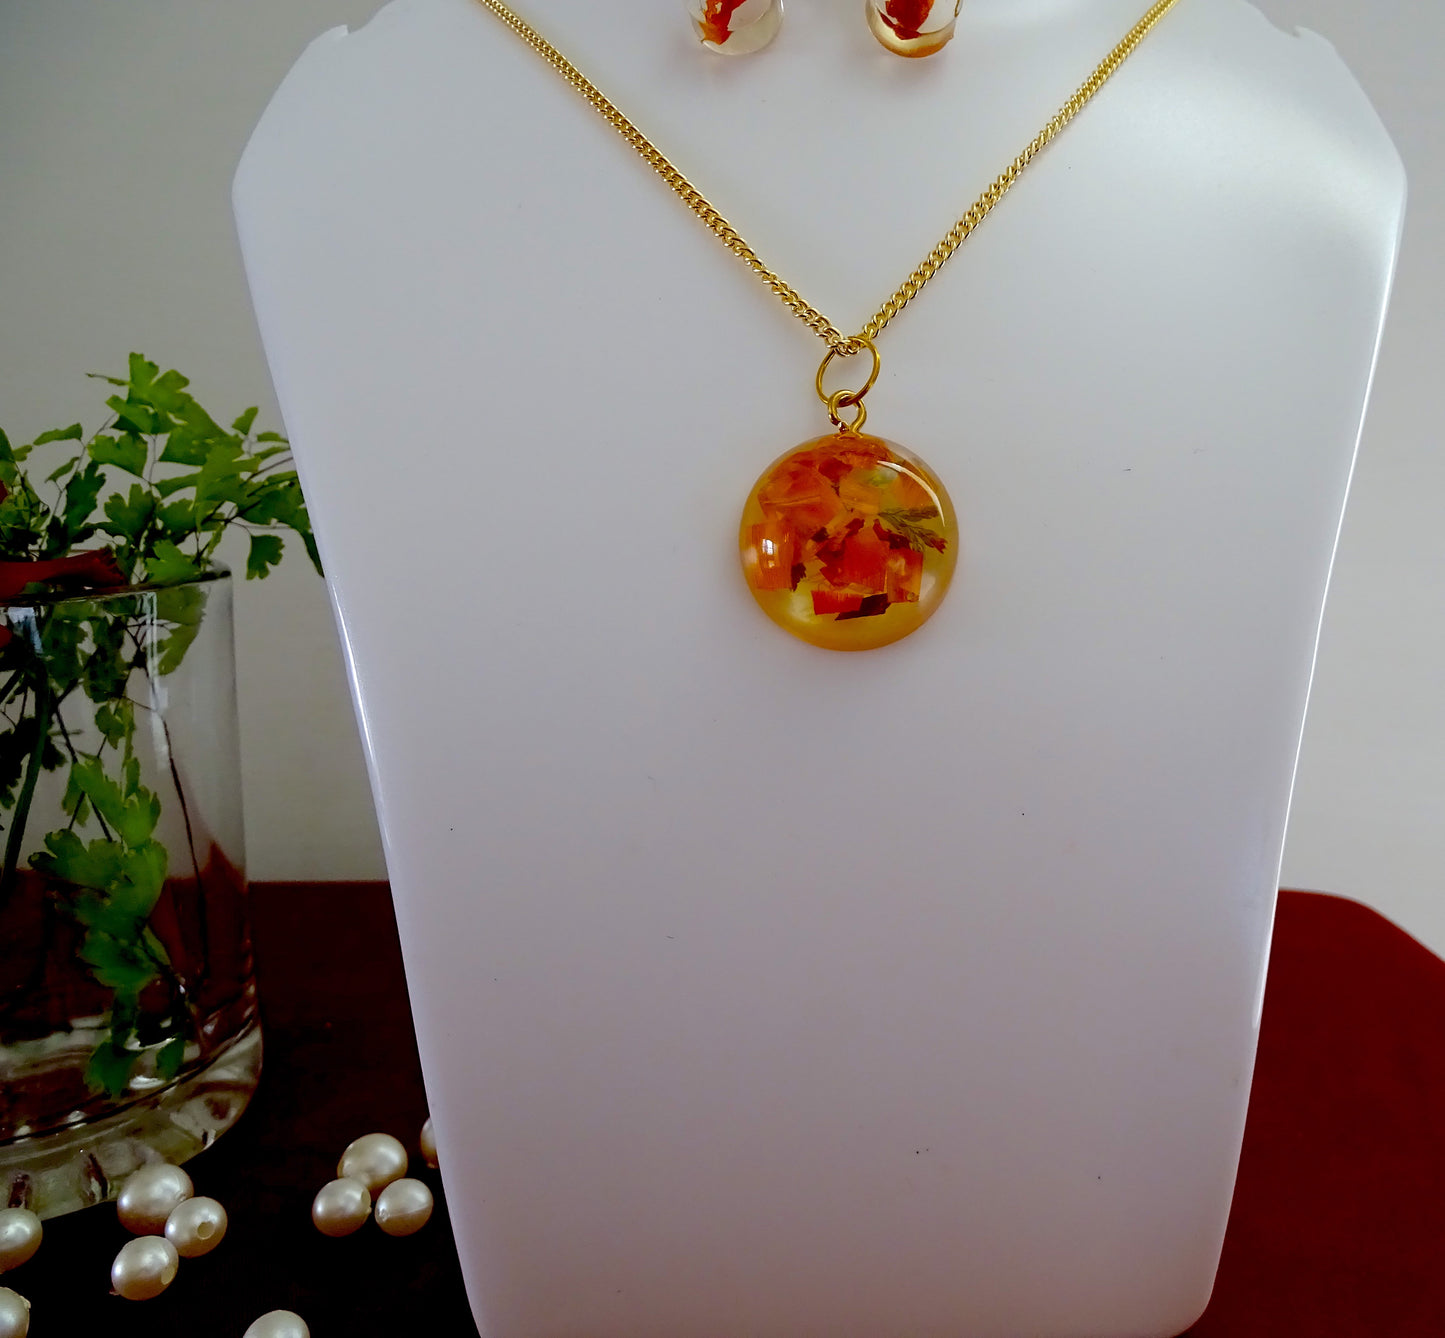 Pendant set with 'Bird of Paradise' flower chips